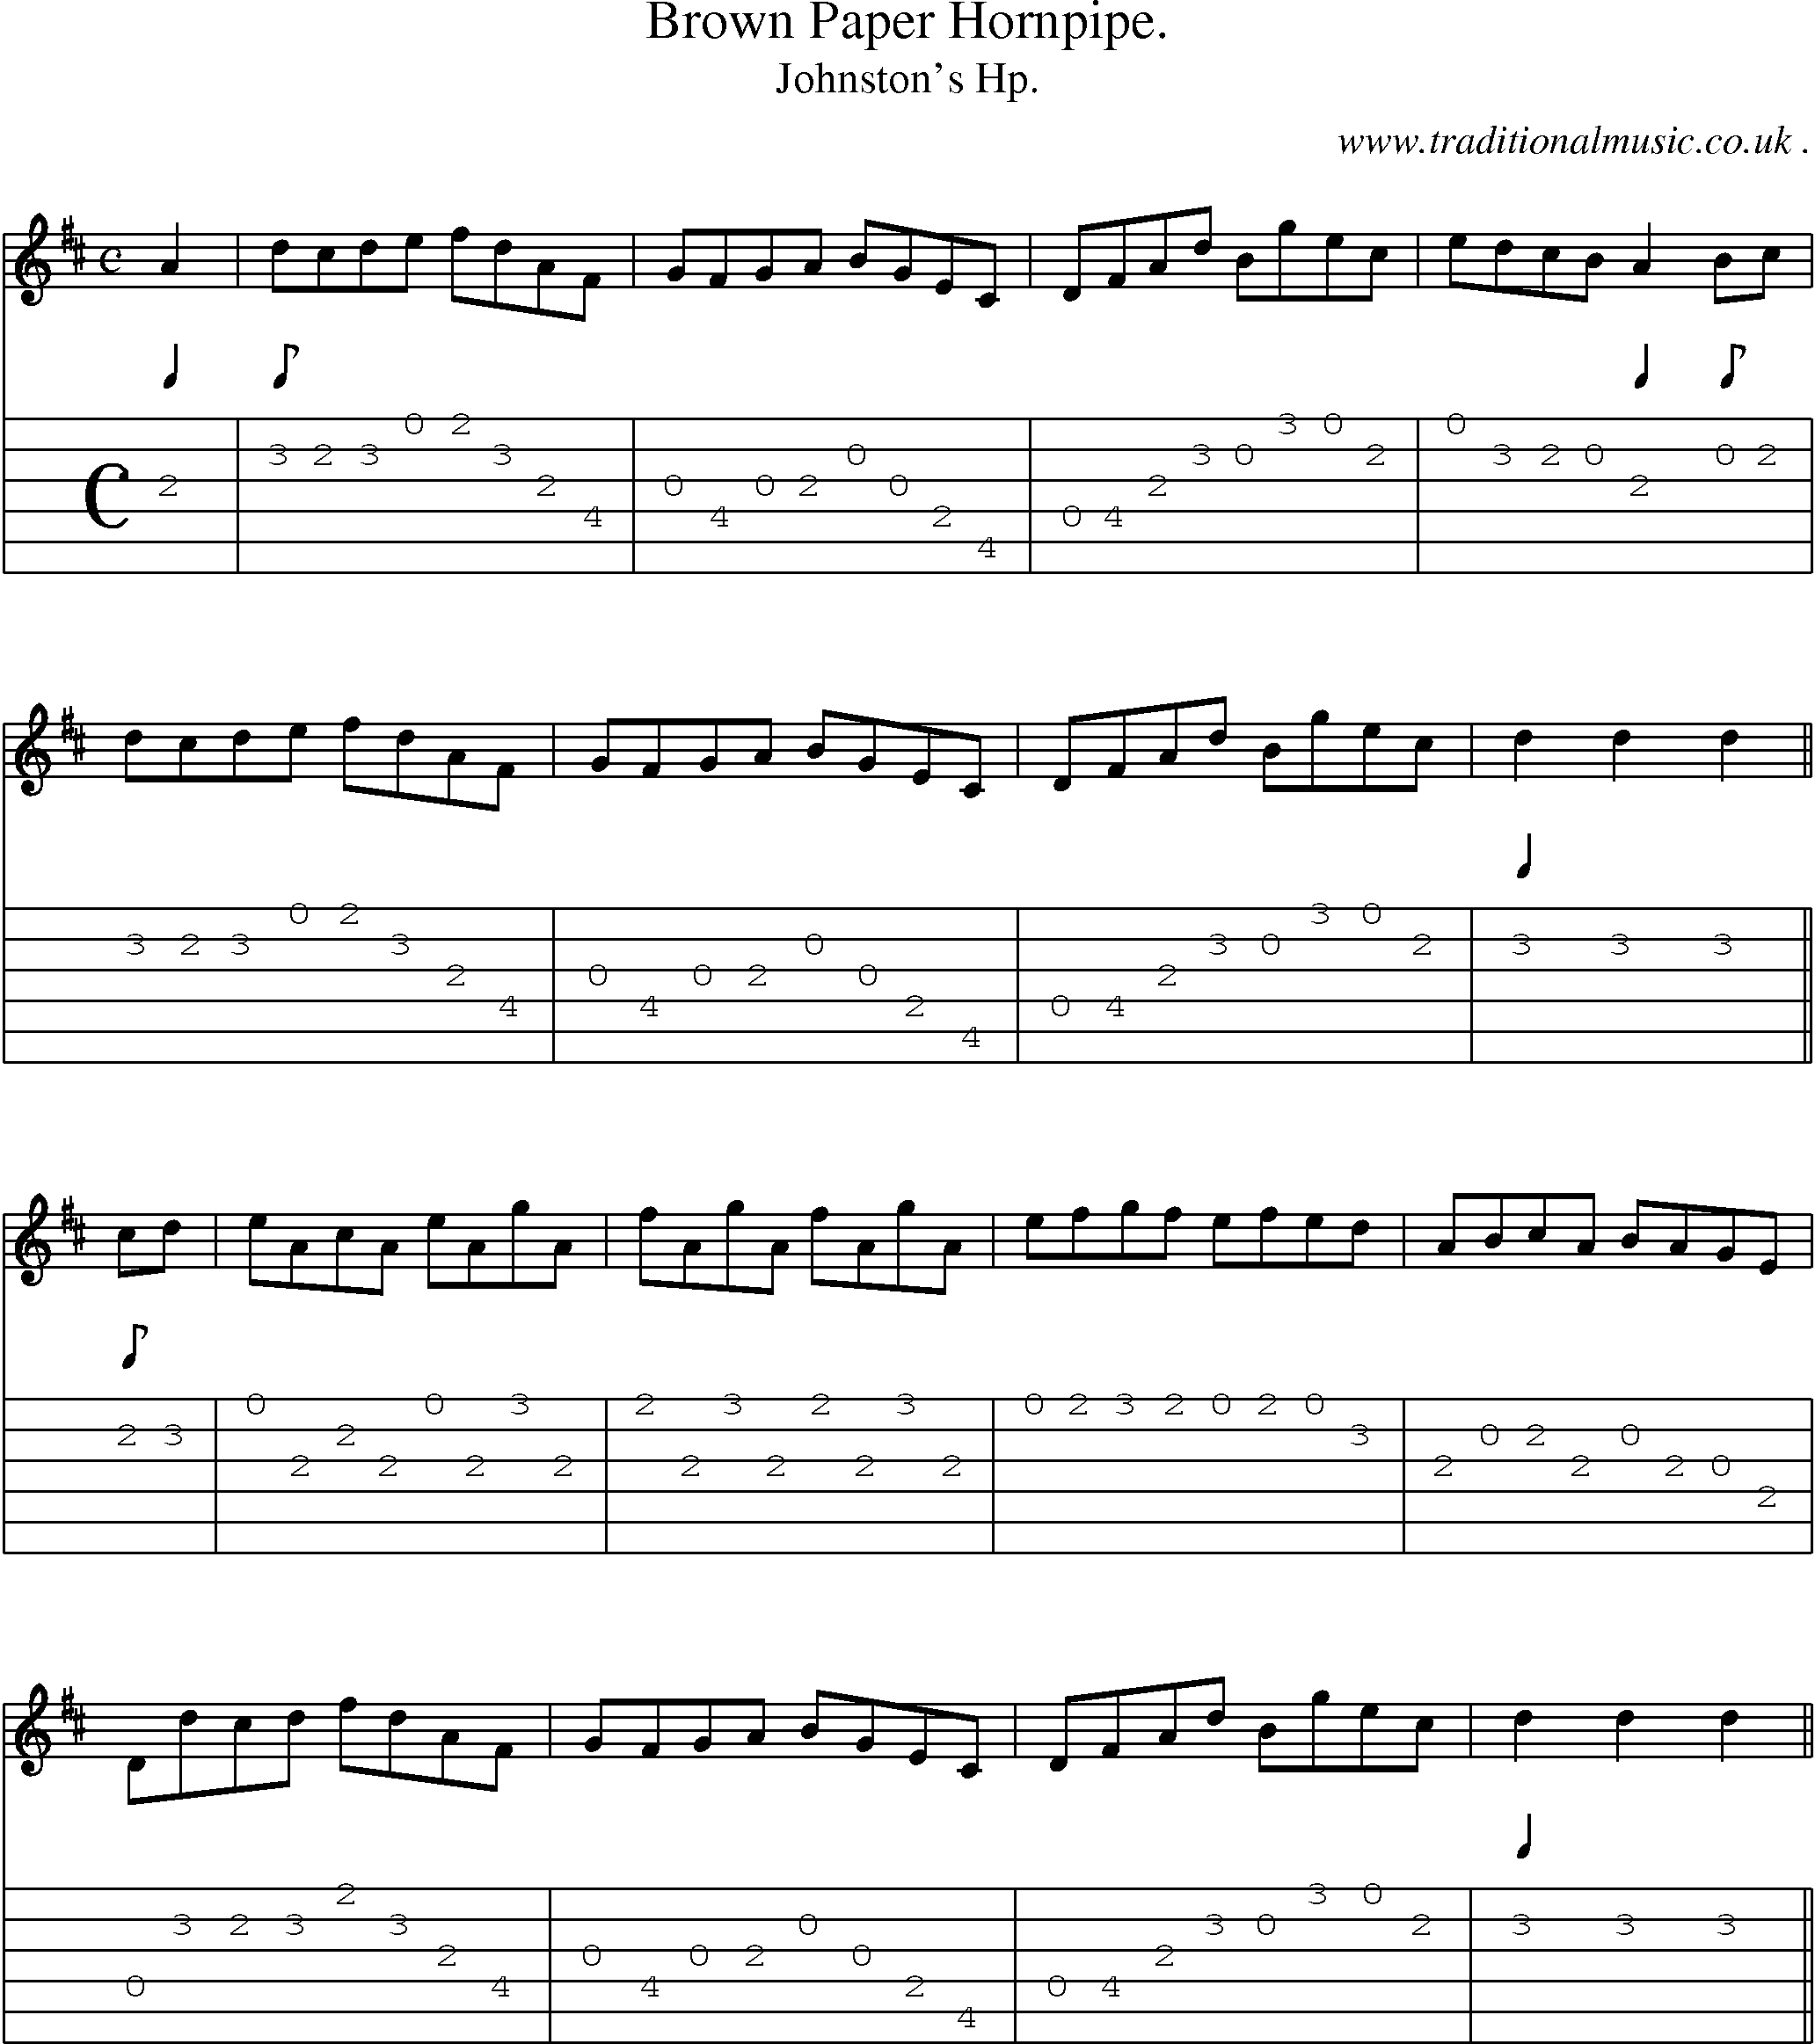 Sheet-Music and Guitar Tabs for Brown Paper Hornpipe